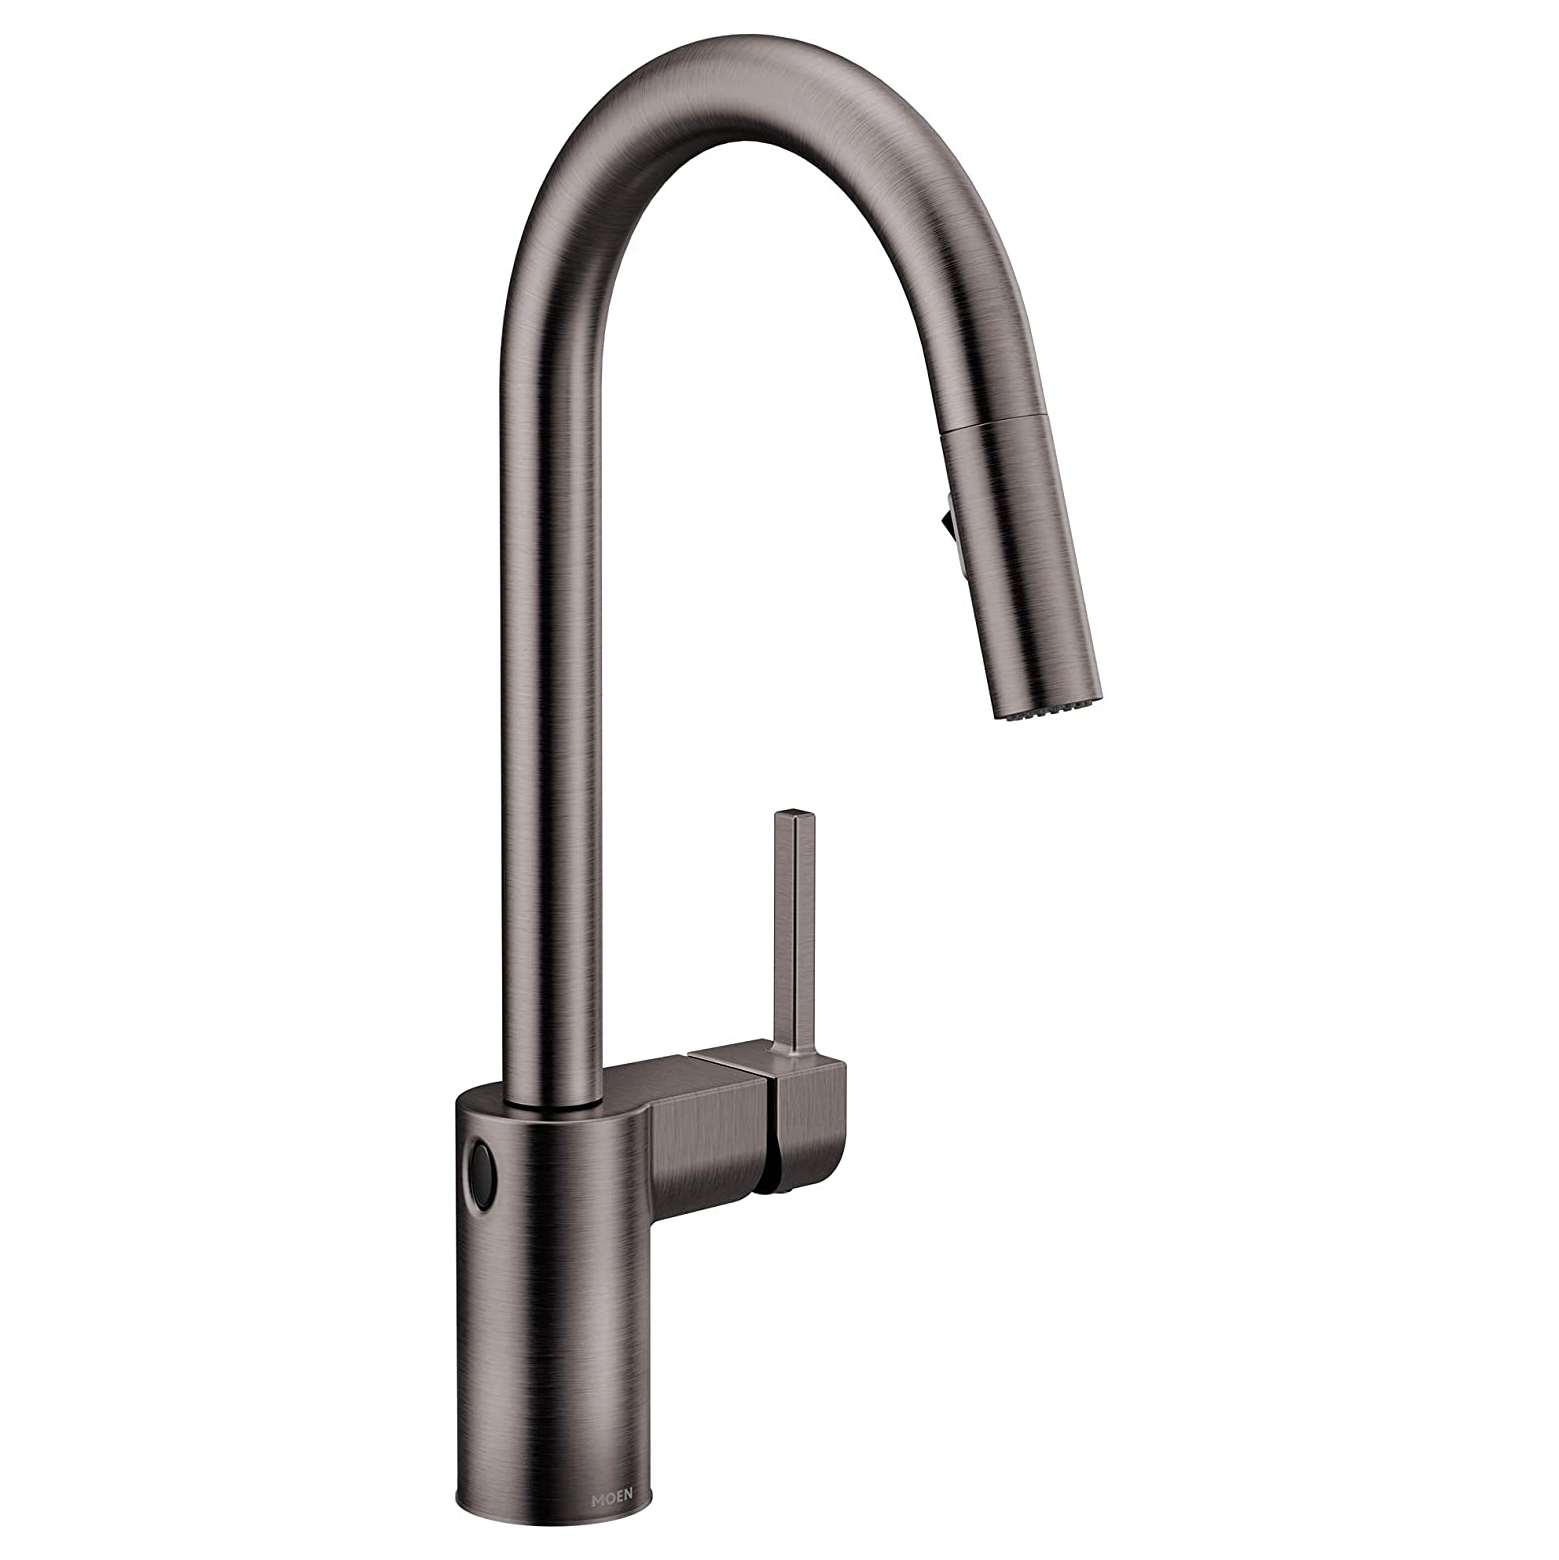 Align MotionSense Wave Pulldown Kitchen Faucet in Blk SS